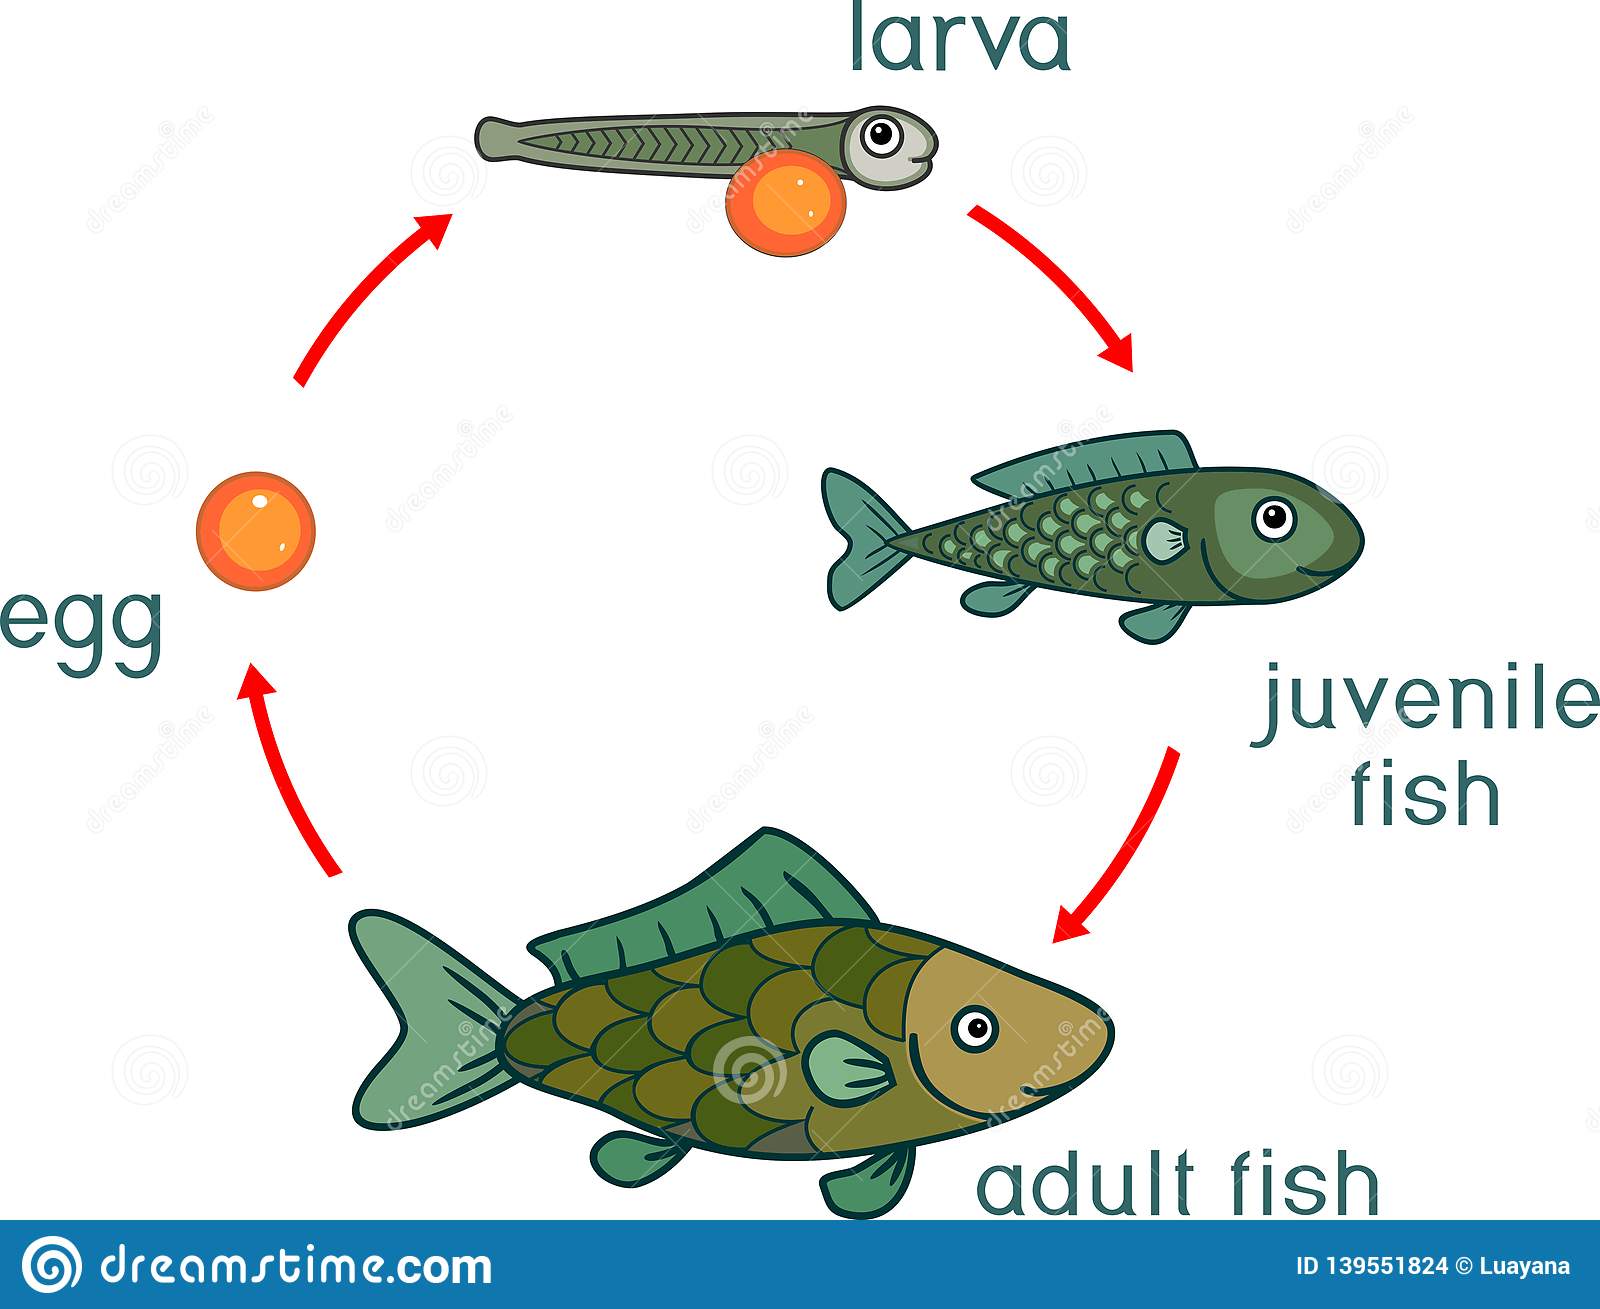 How many stages are there in a fish life cycle?